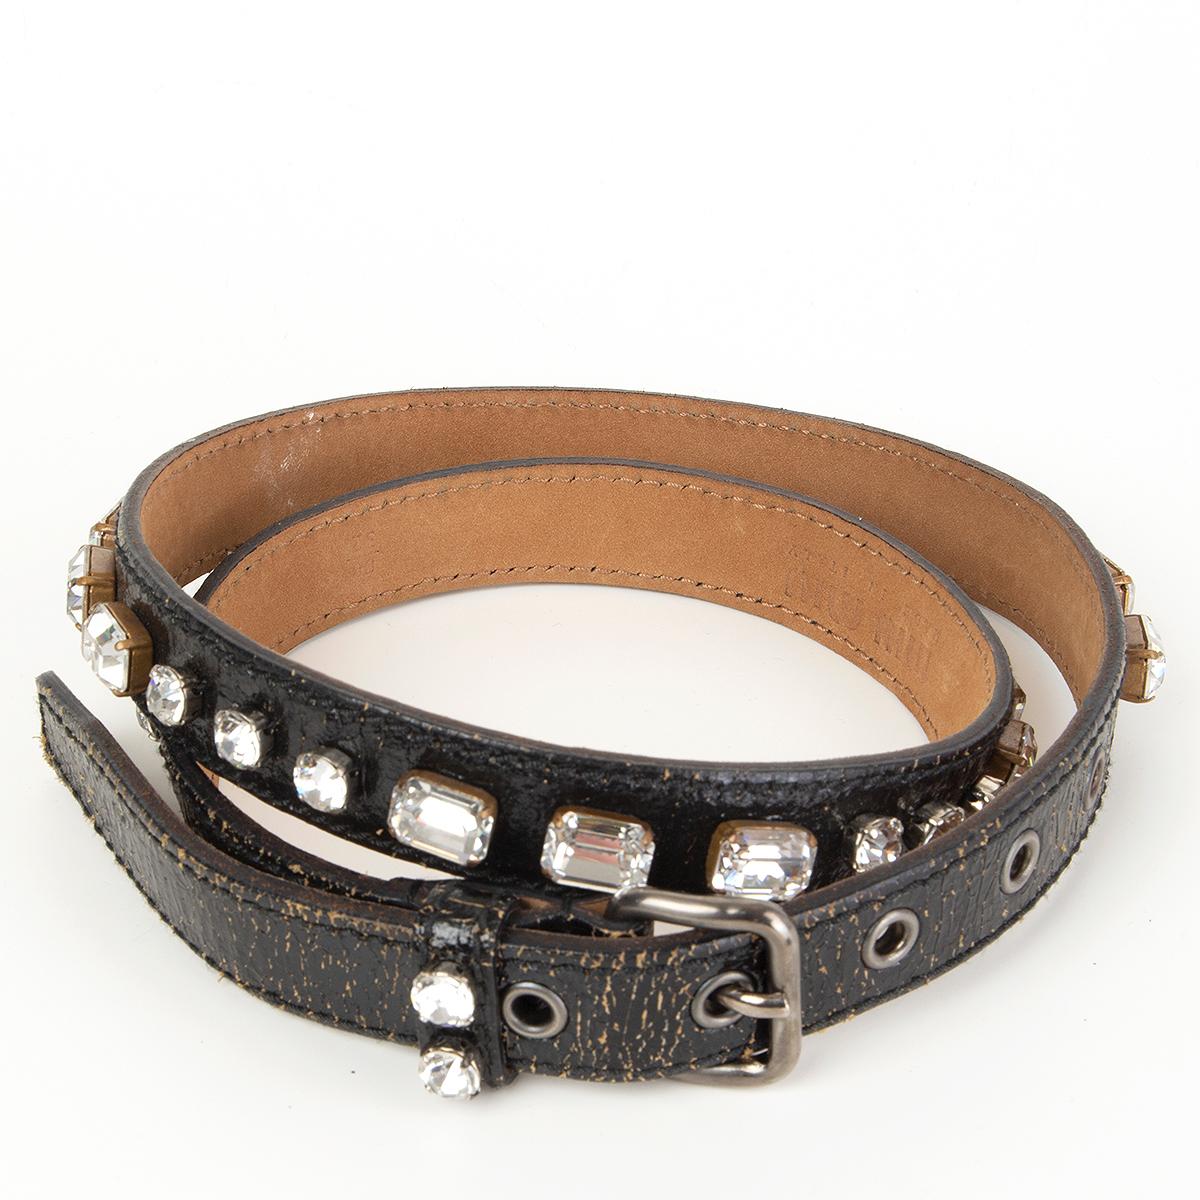 Miu Miu crystal embellished black cracked leather belt. Has been worn and is in excellent condition. 

Tag Size 80
Width 2cm (0.8in)
Fits 74cm (28.9in) to 84cm (32.8in)
Length 96cm (37.4in)
Buckle Size Height 3cm (1.2in)
Buckle Size Width 2.5cm